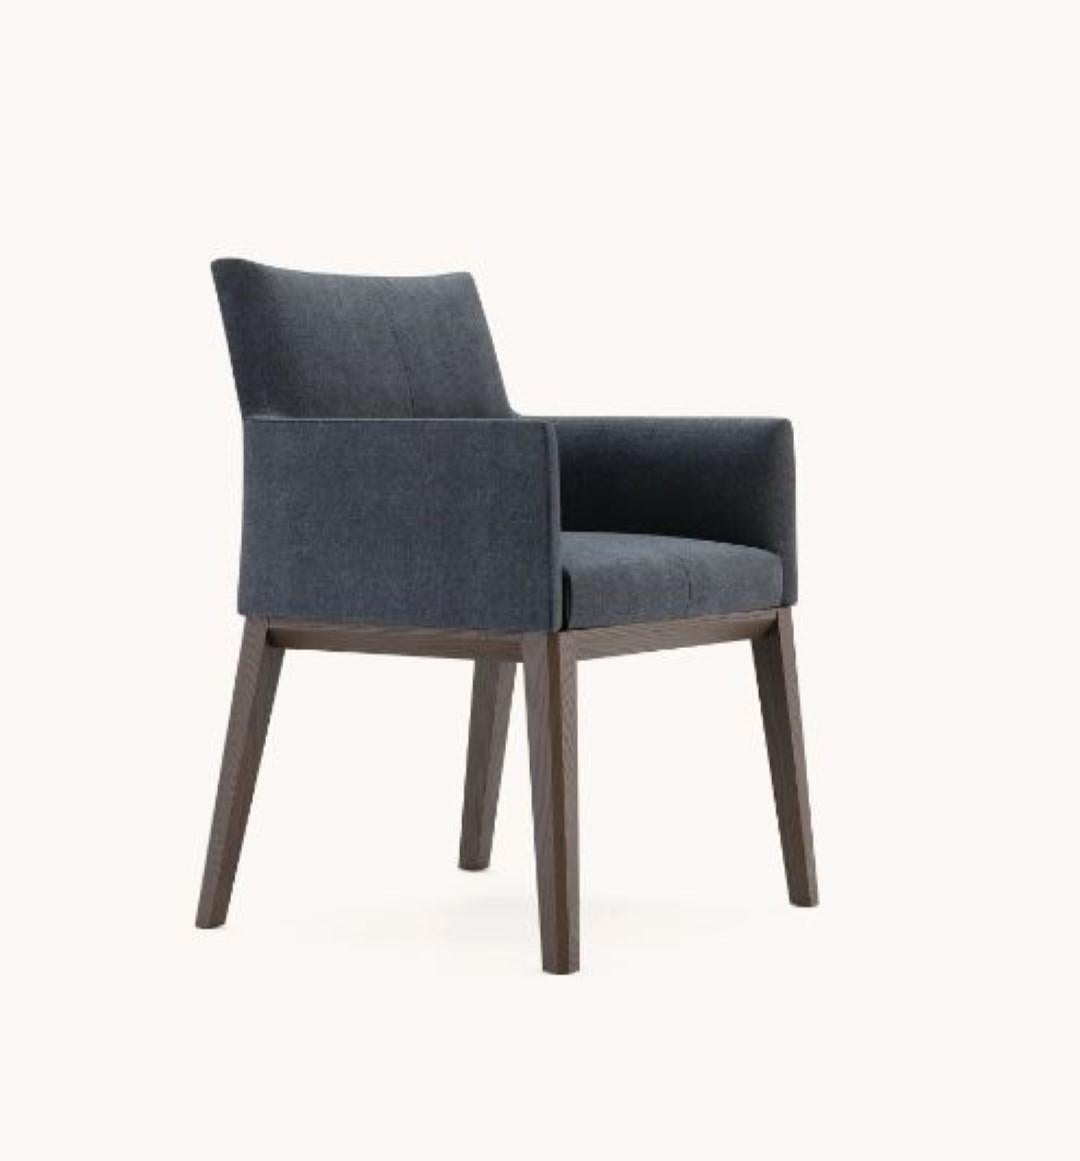 Carter chair by Domkapa
Materials: Fabric, Fumé Stained Ash.
Dimensions: W 62 x D 68 x H 86 cm.
Also available in different materials. 

Carter chair is the perfect combination between traditional and contemporary lines, thickness, and